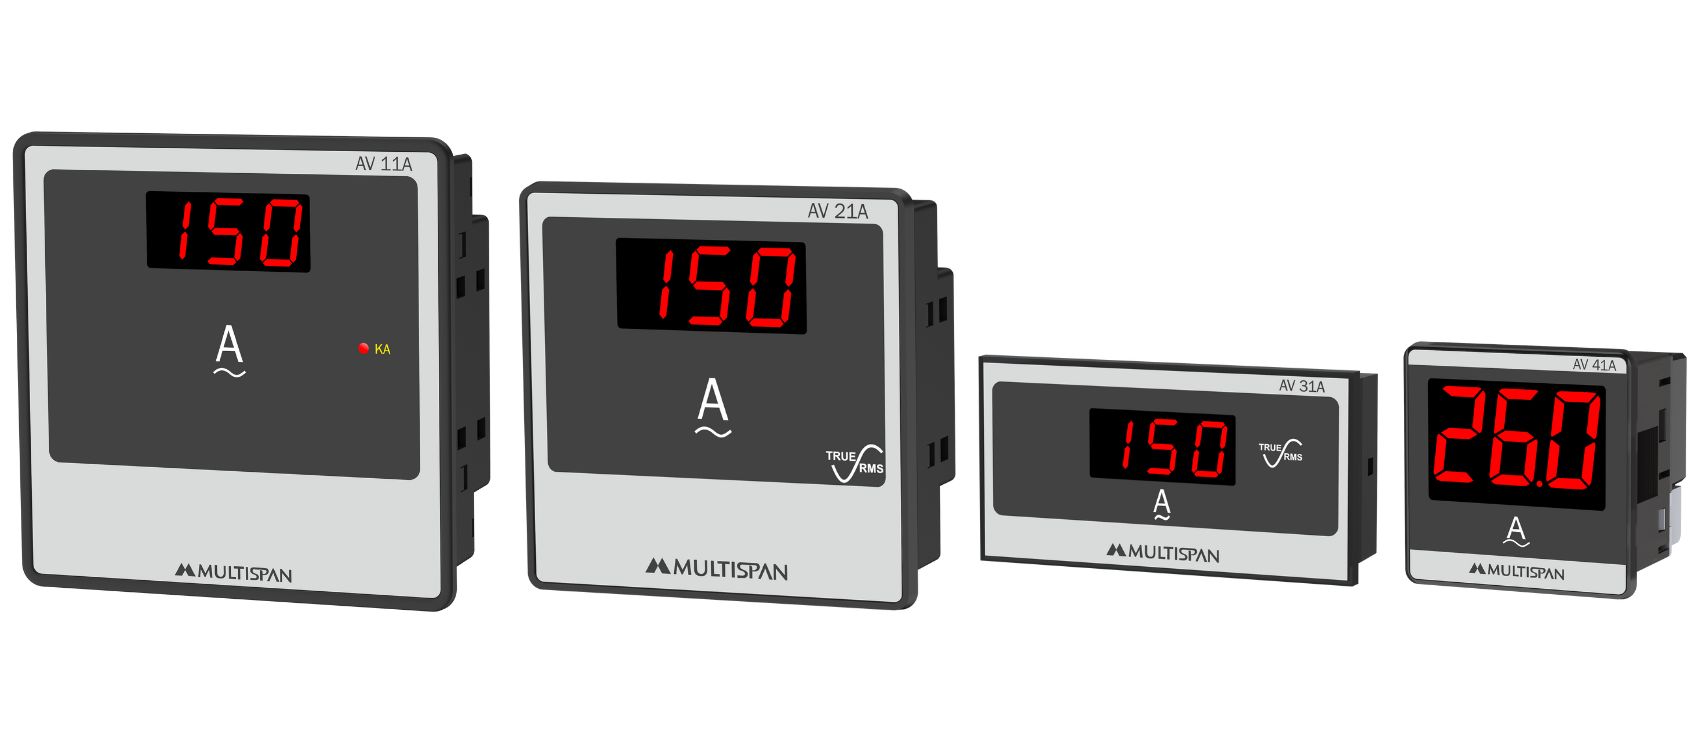 AV-11A- 1 Ph AC Ampere Meter – Built in 30A CT - product image